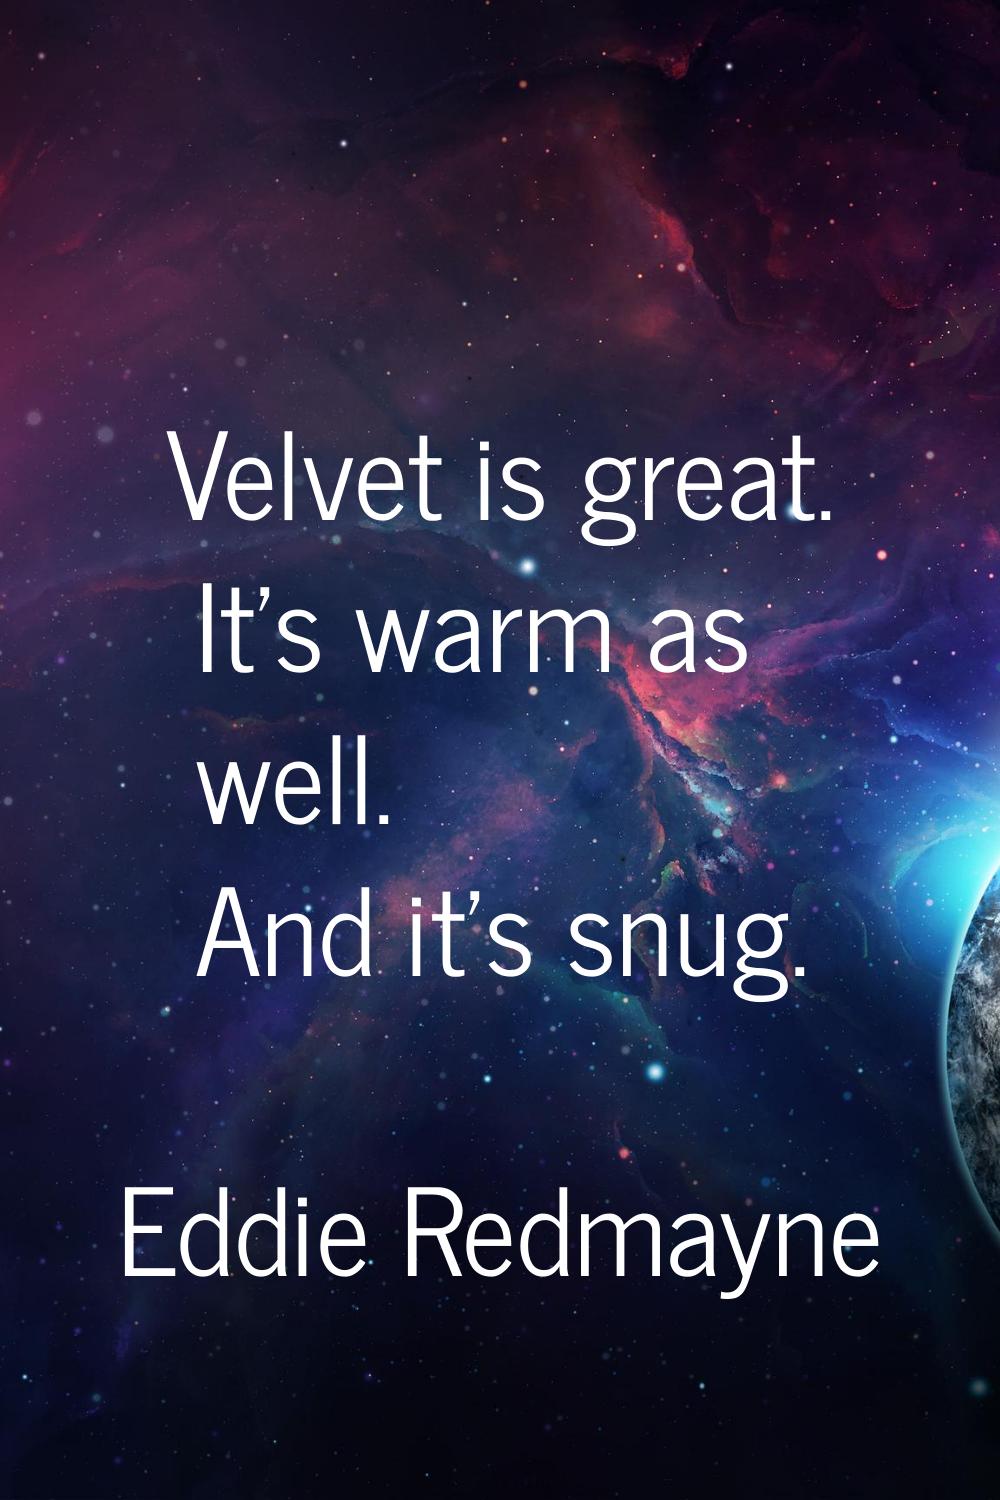 Velvet is great. It's warm as well. And it's snug.